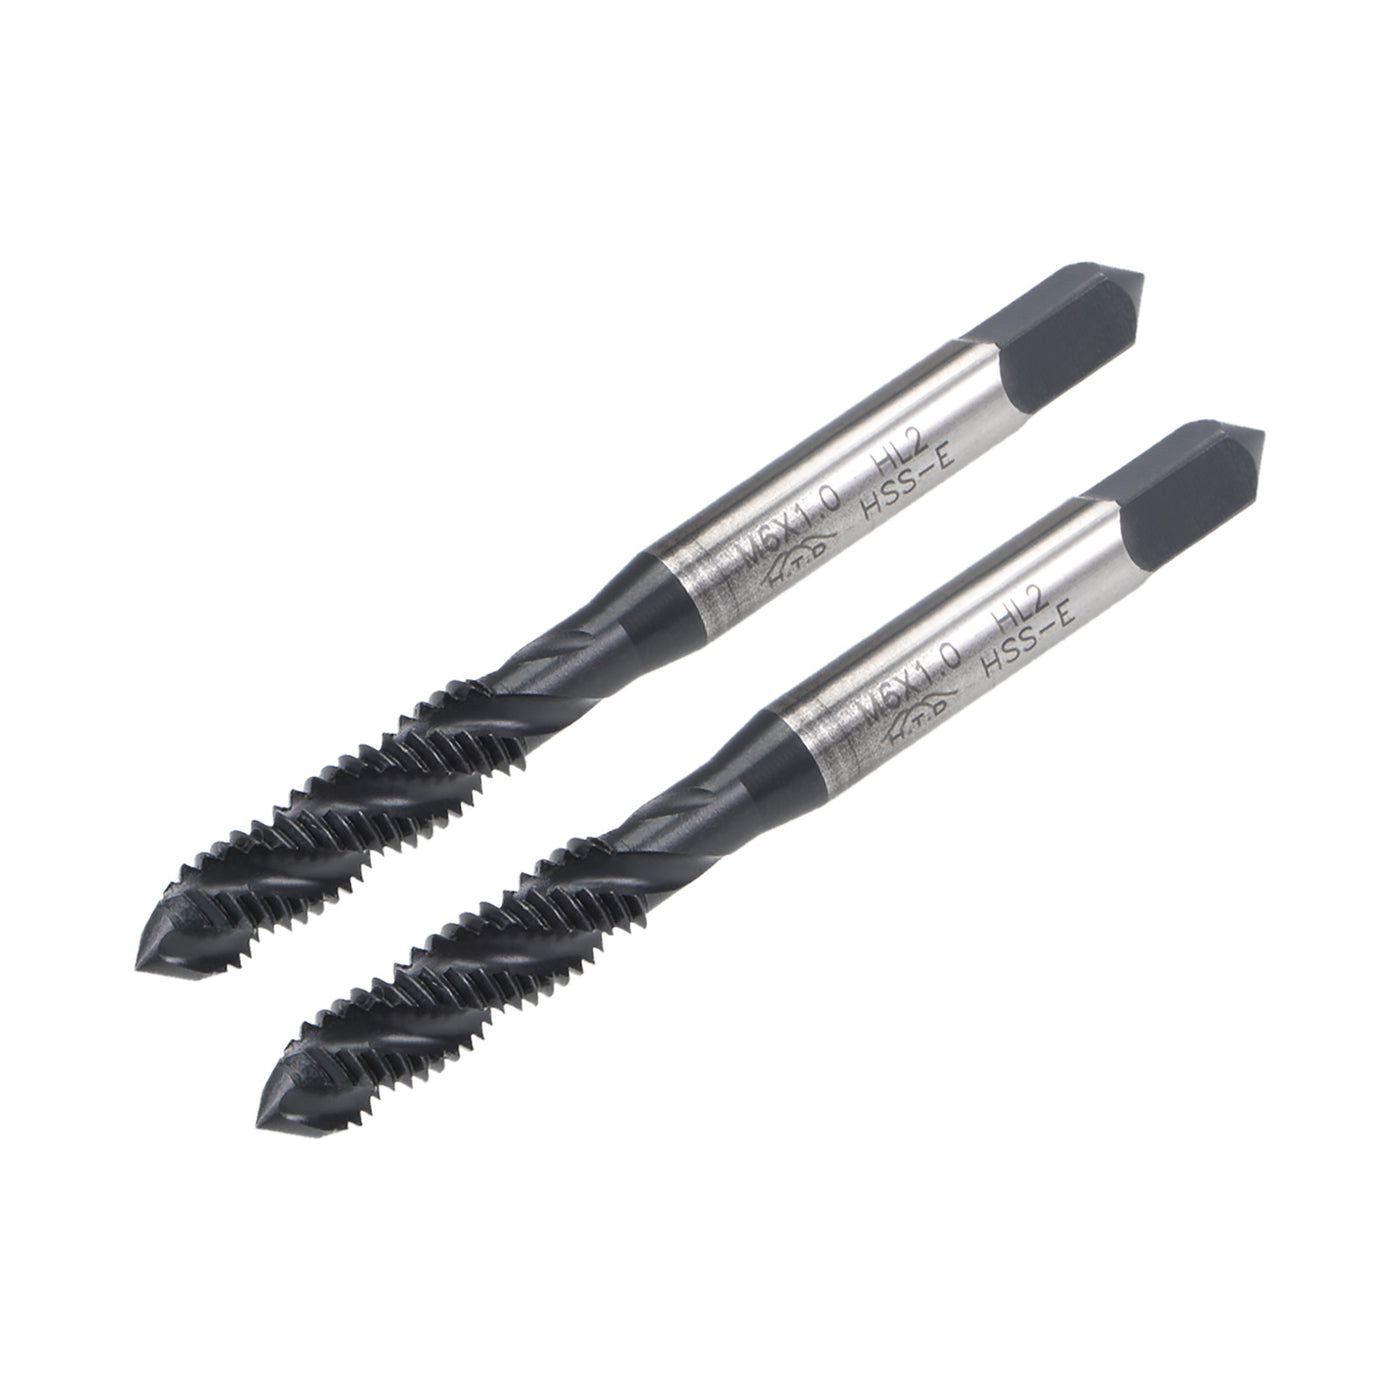 uxcell Uxcell M6 x 1.0 Spiral Flute Tap Metric Machine Thread Tap HSS Nitriding Coated 2pcs